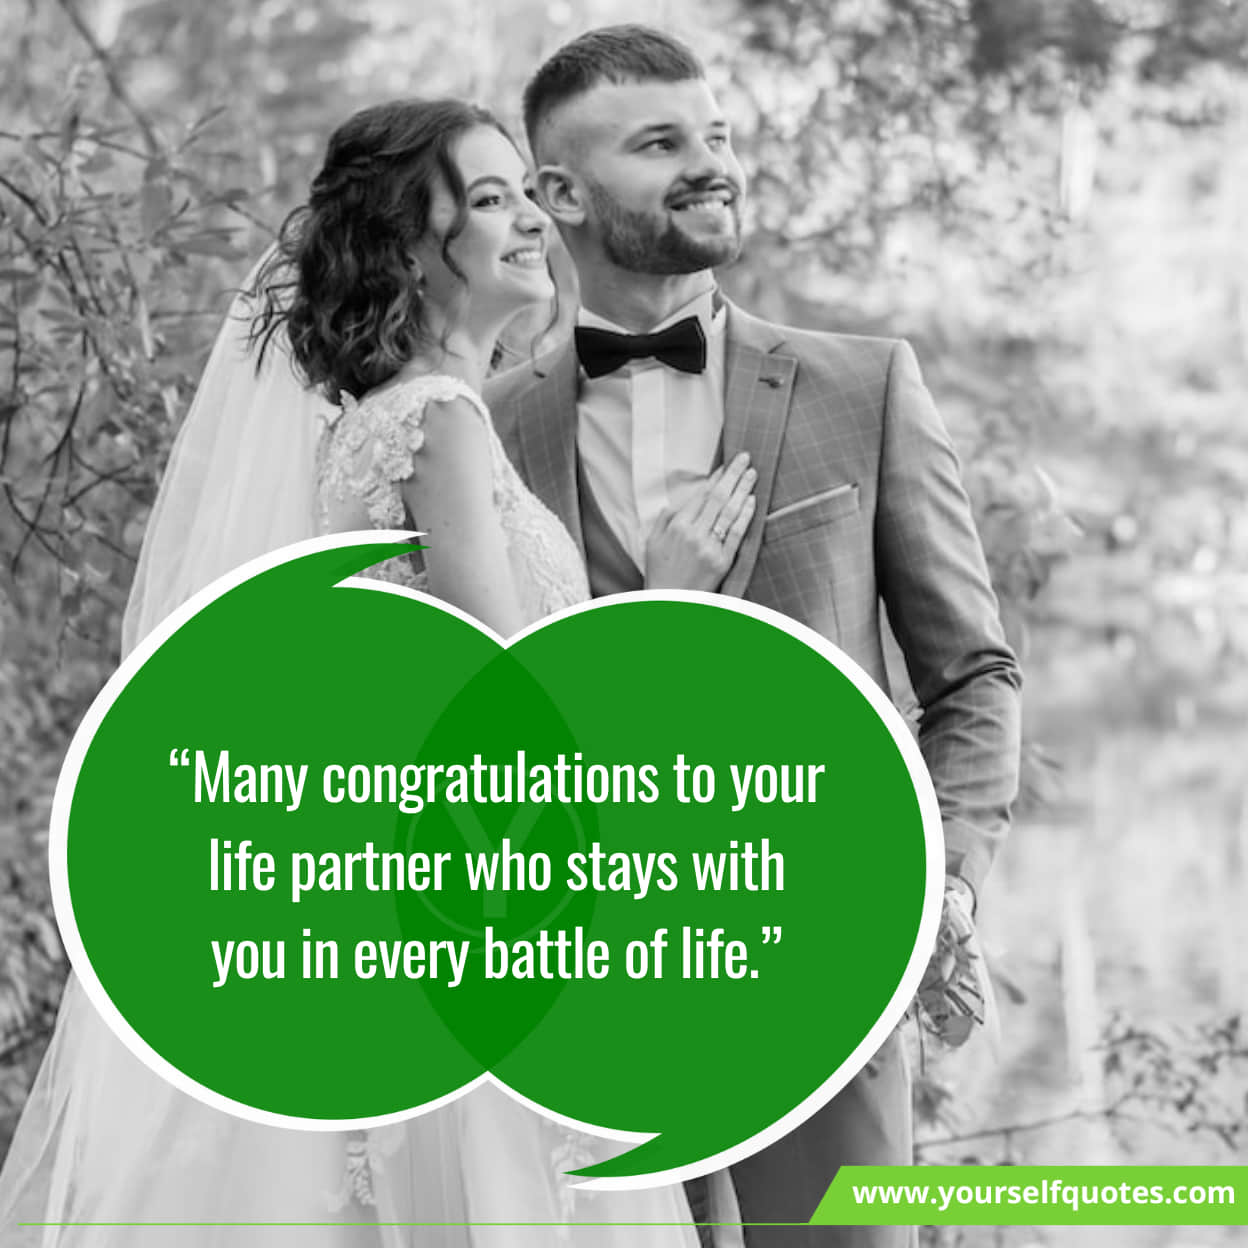 Wedding Messages Wishes & Quotes